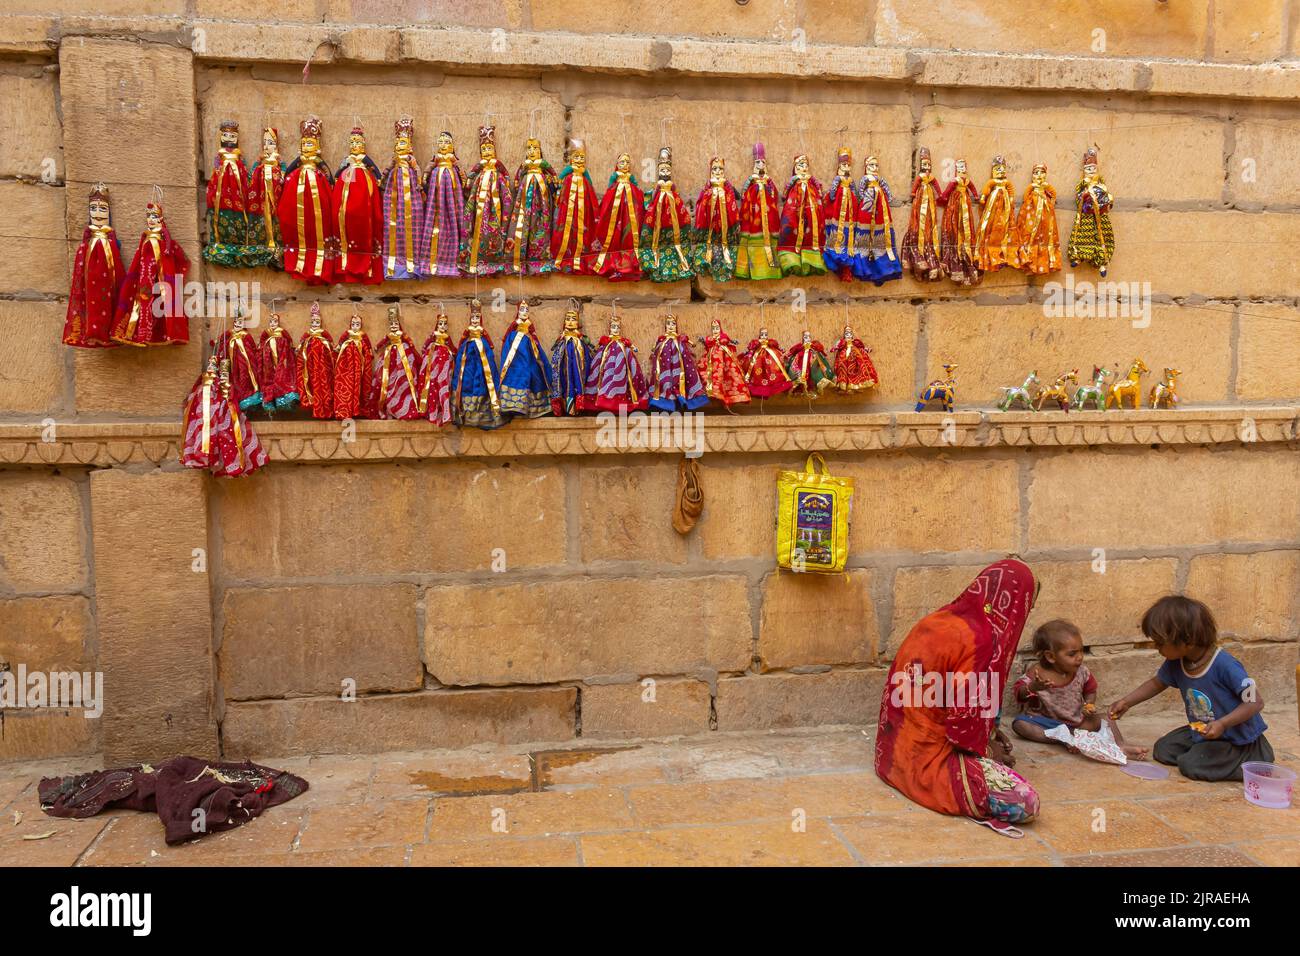 The Views of Jaisalmer City, Landscapes and street Activities Stock Photo